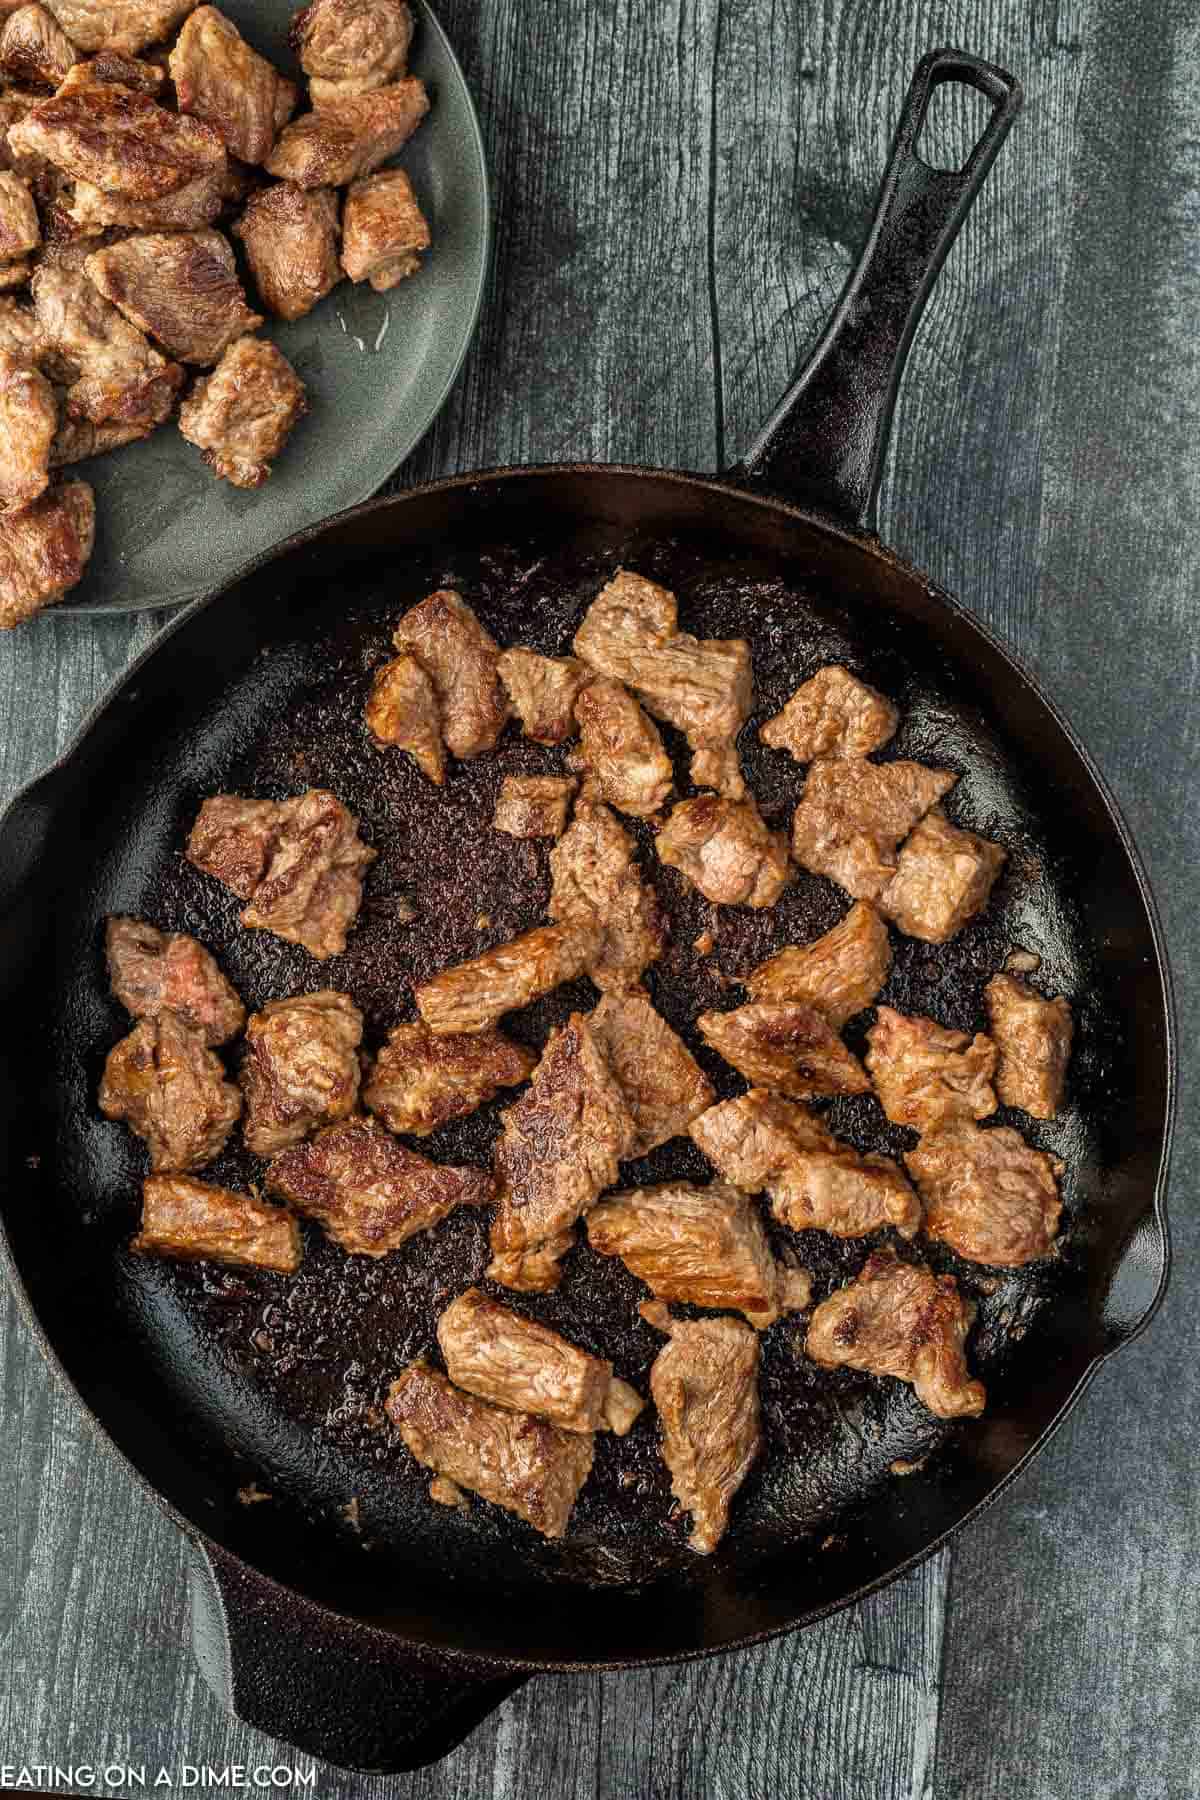 Cooking beef in a cast iron skillet